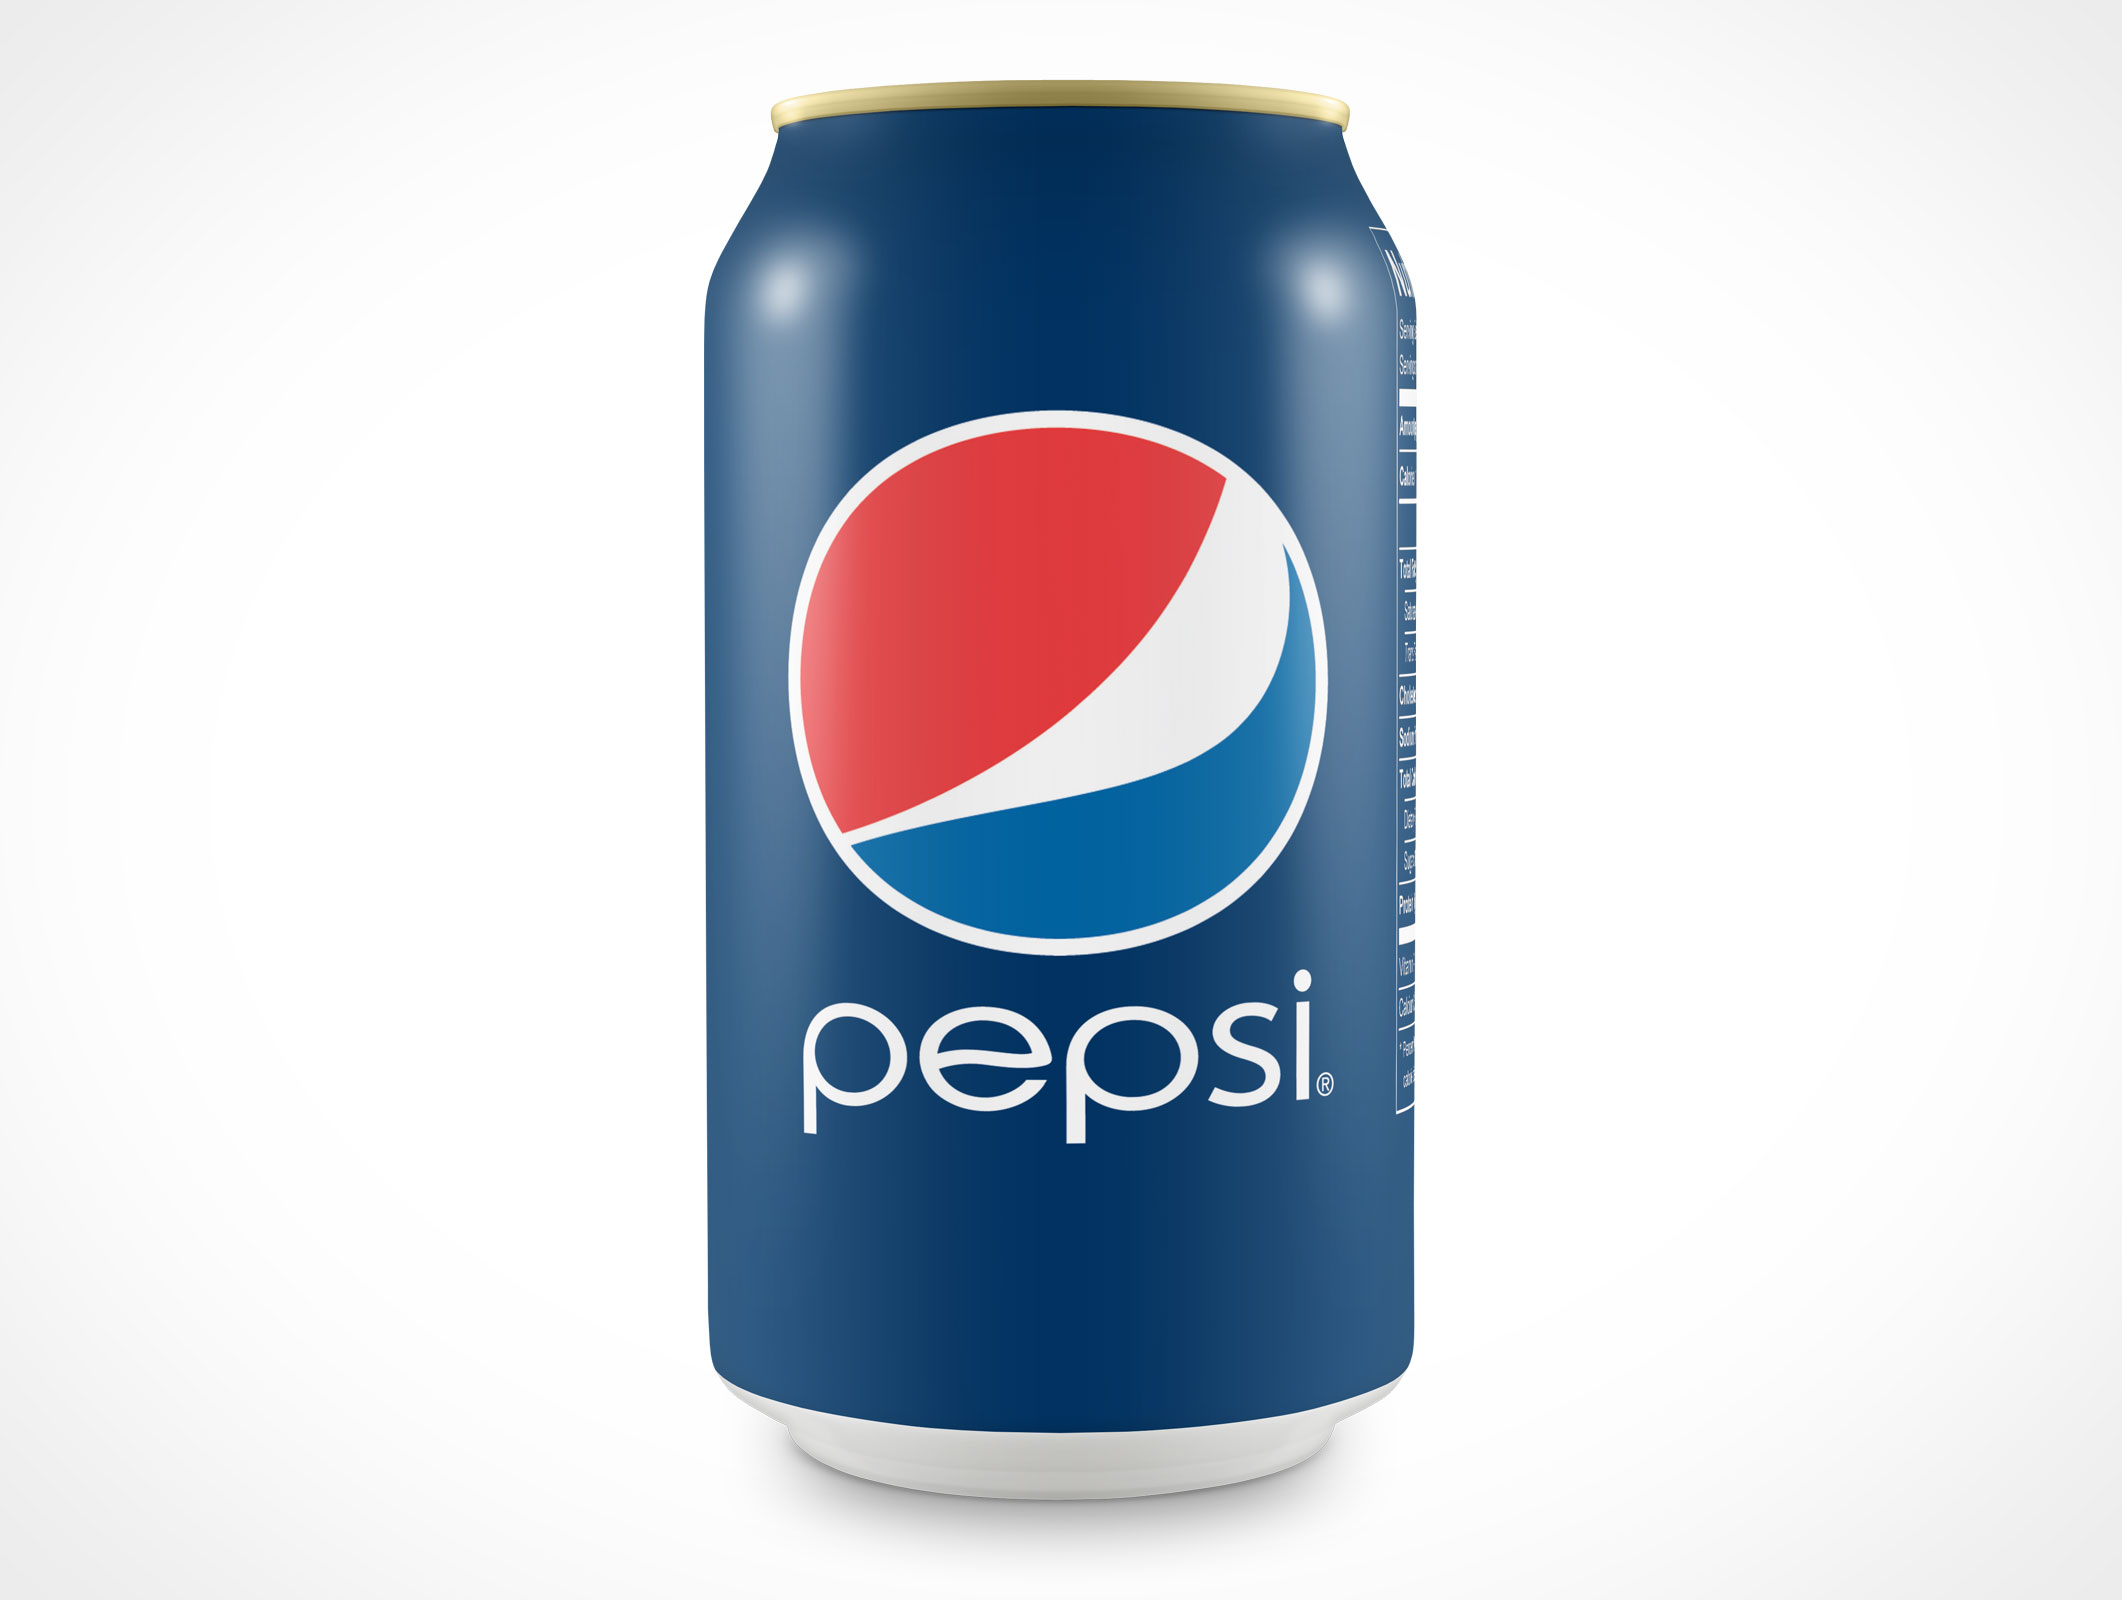 Pictures Of Soda Cans Free Cliparts That You Can Download To You